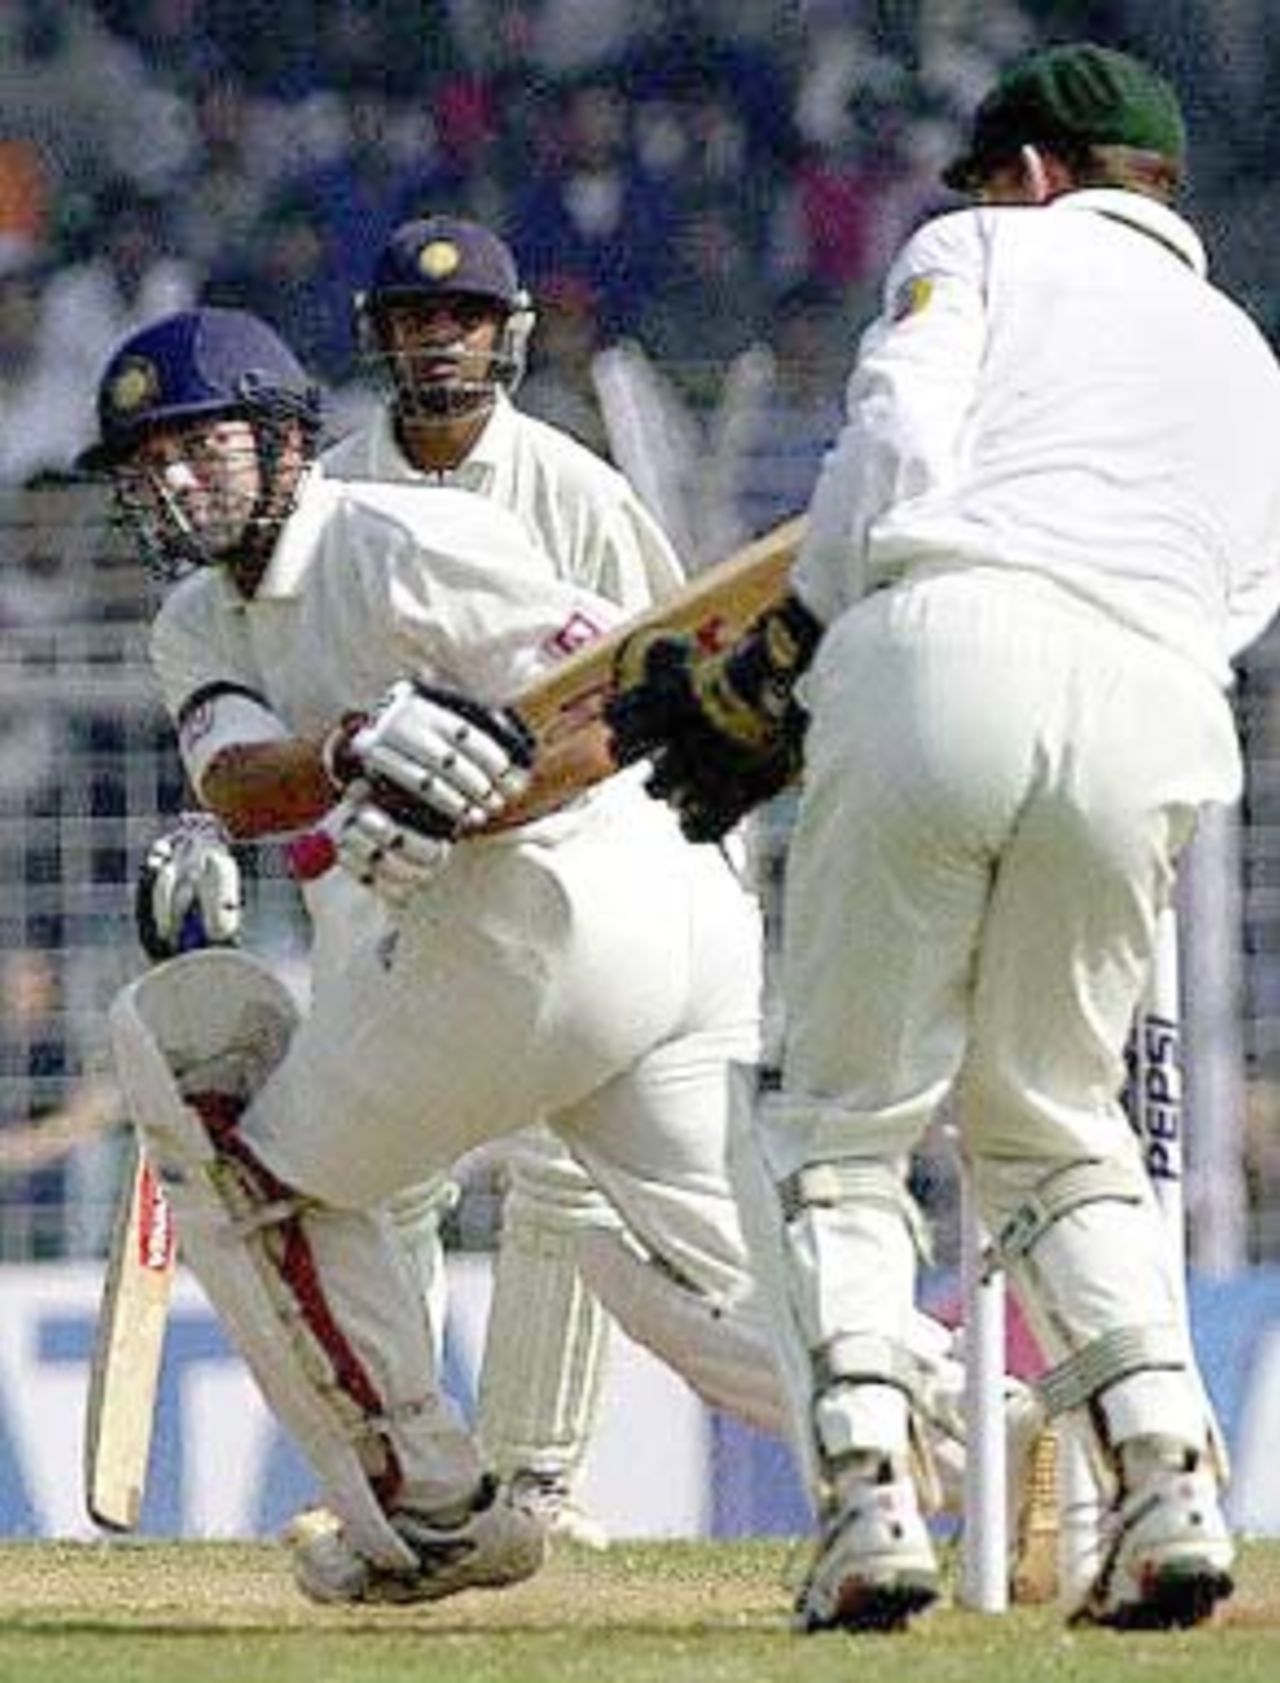 Indian batsman Sachin Tendulkar (L) sweeps a delivery from Australian spinner Shane Warne (not in the picture) as team-mate Rahul Dravid (C) and Australian wicketkeeper Adam Gilchrist look on during third day's play of the first test match between India and Australia at the Wankhade stadium in Mumbai 01 March 2001. Tendulkar was playing at 29 to steady India's second innings at 103 for 2 after conceding a 173 runs lead to Australia in the first innings.